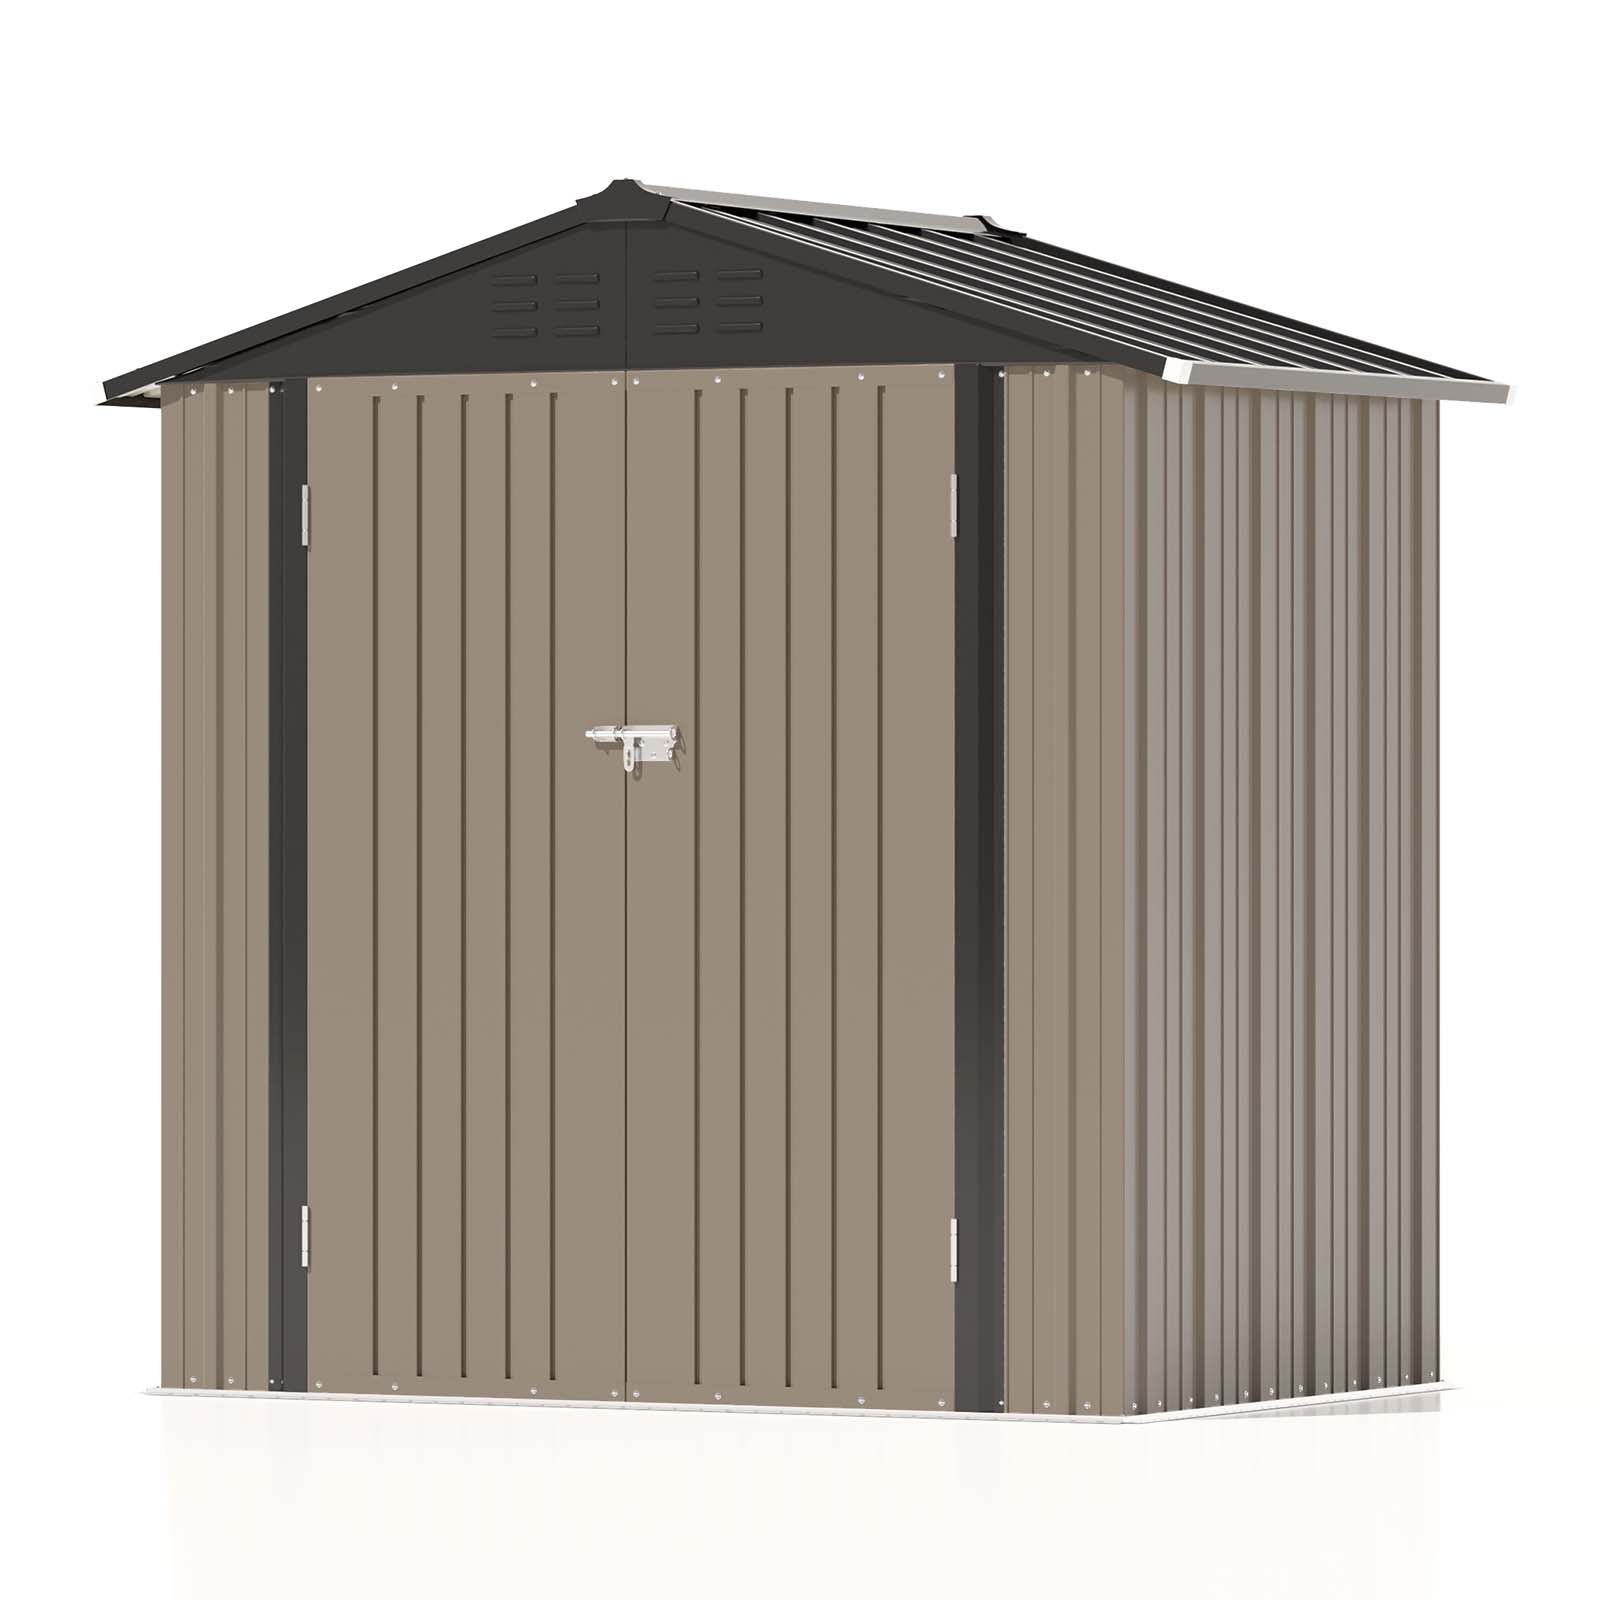 Patiowell 6x4 Metal Shed With Peak Roof-1